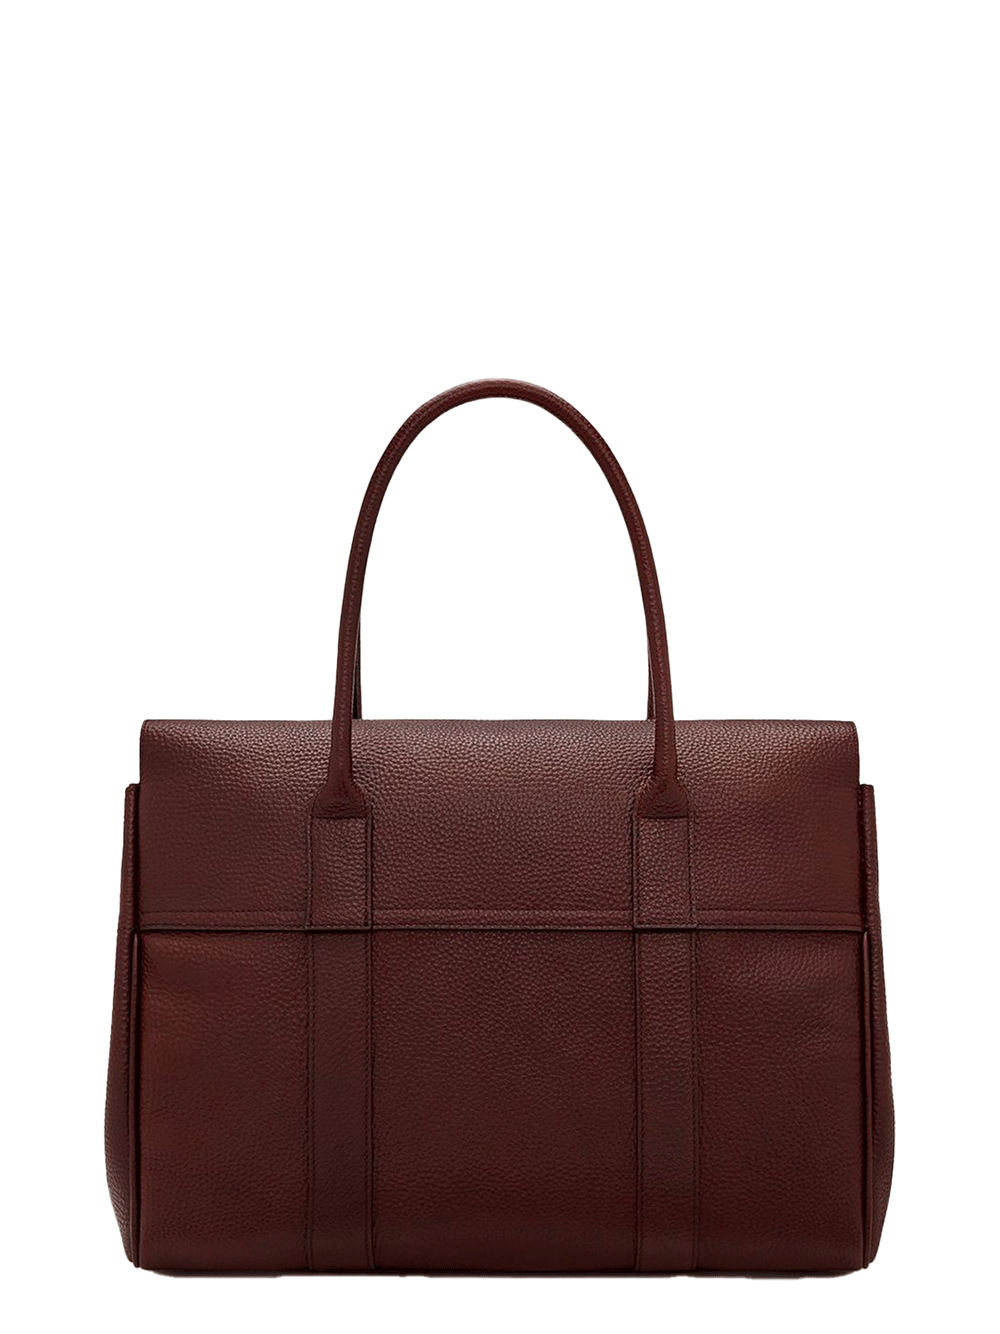 Mulberry-Bayswater-Small-Classic-Grain-Oxblood-2